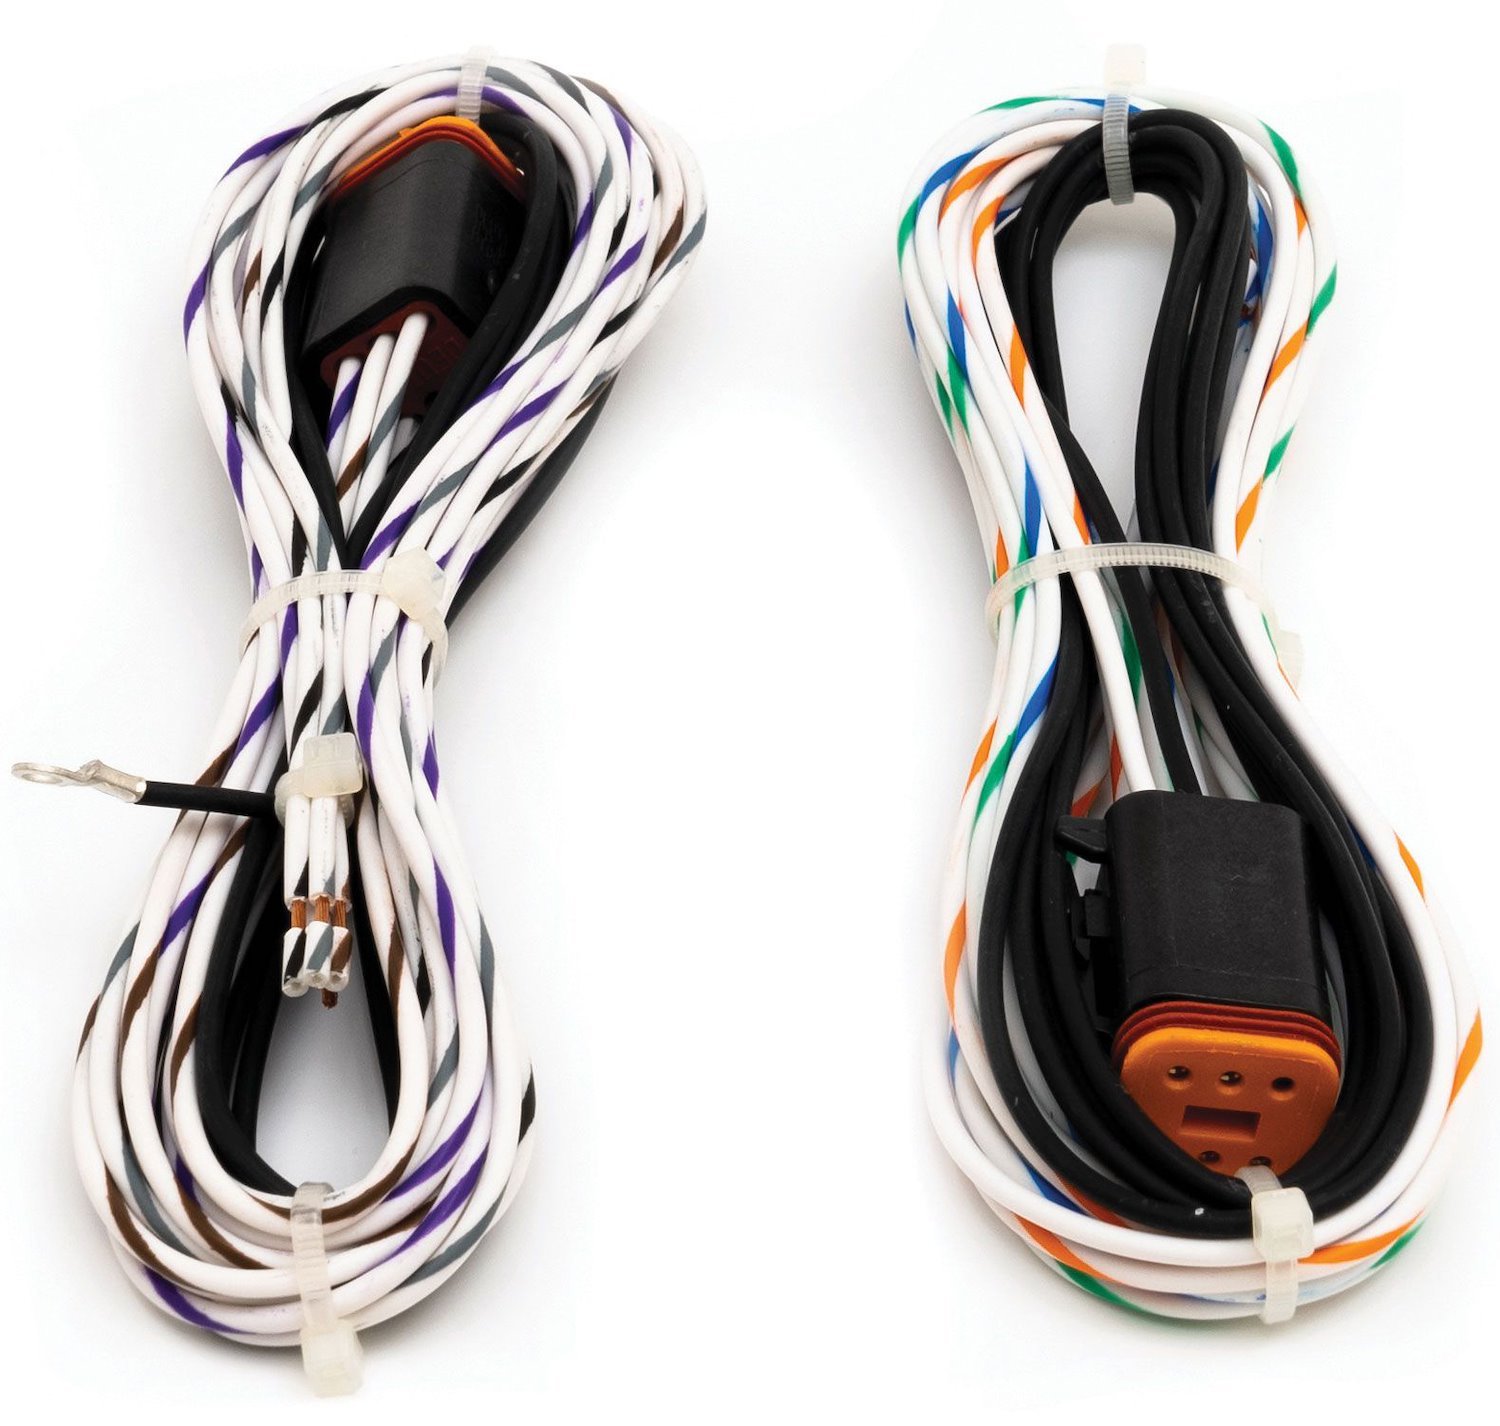 ENDO-VT Wiring Harness, For ENDO-VT Air Tanks